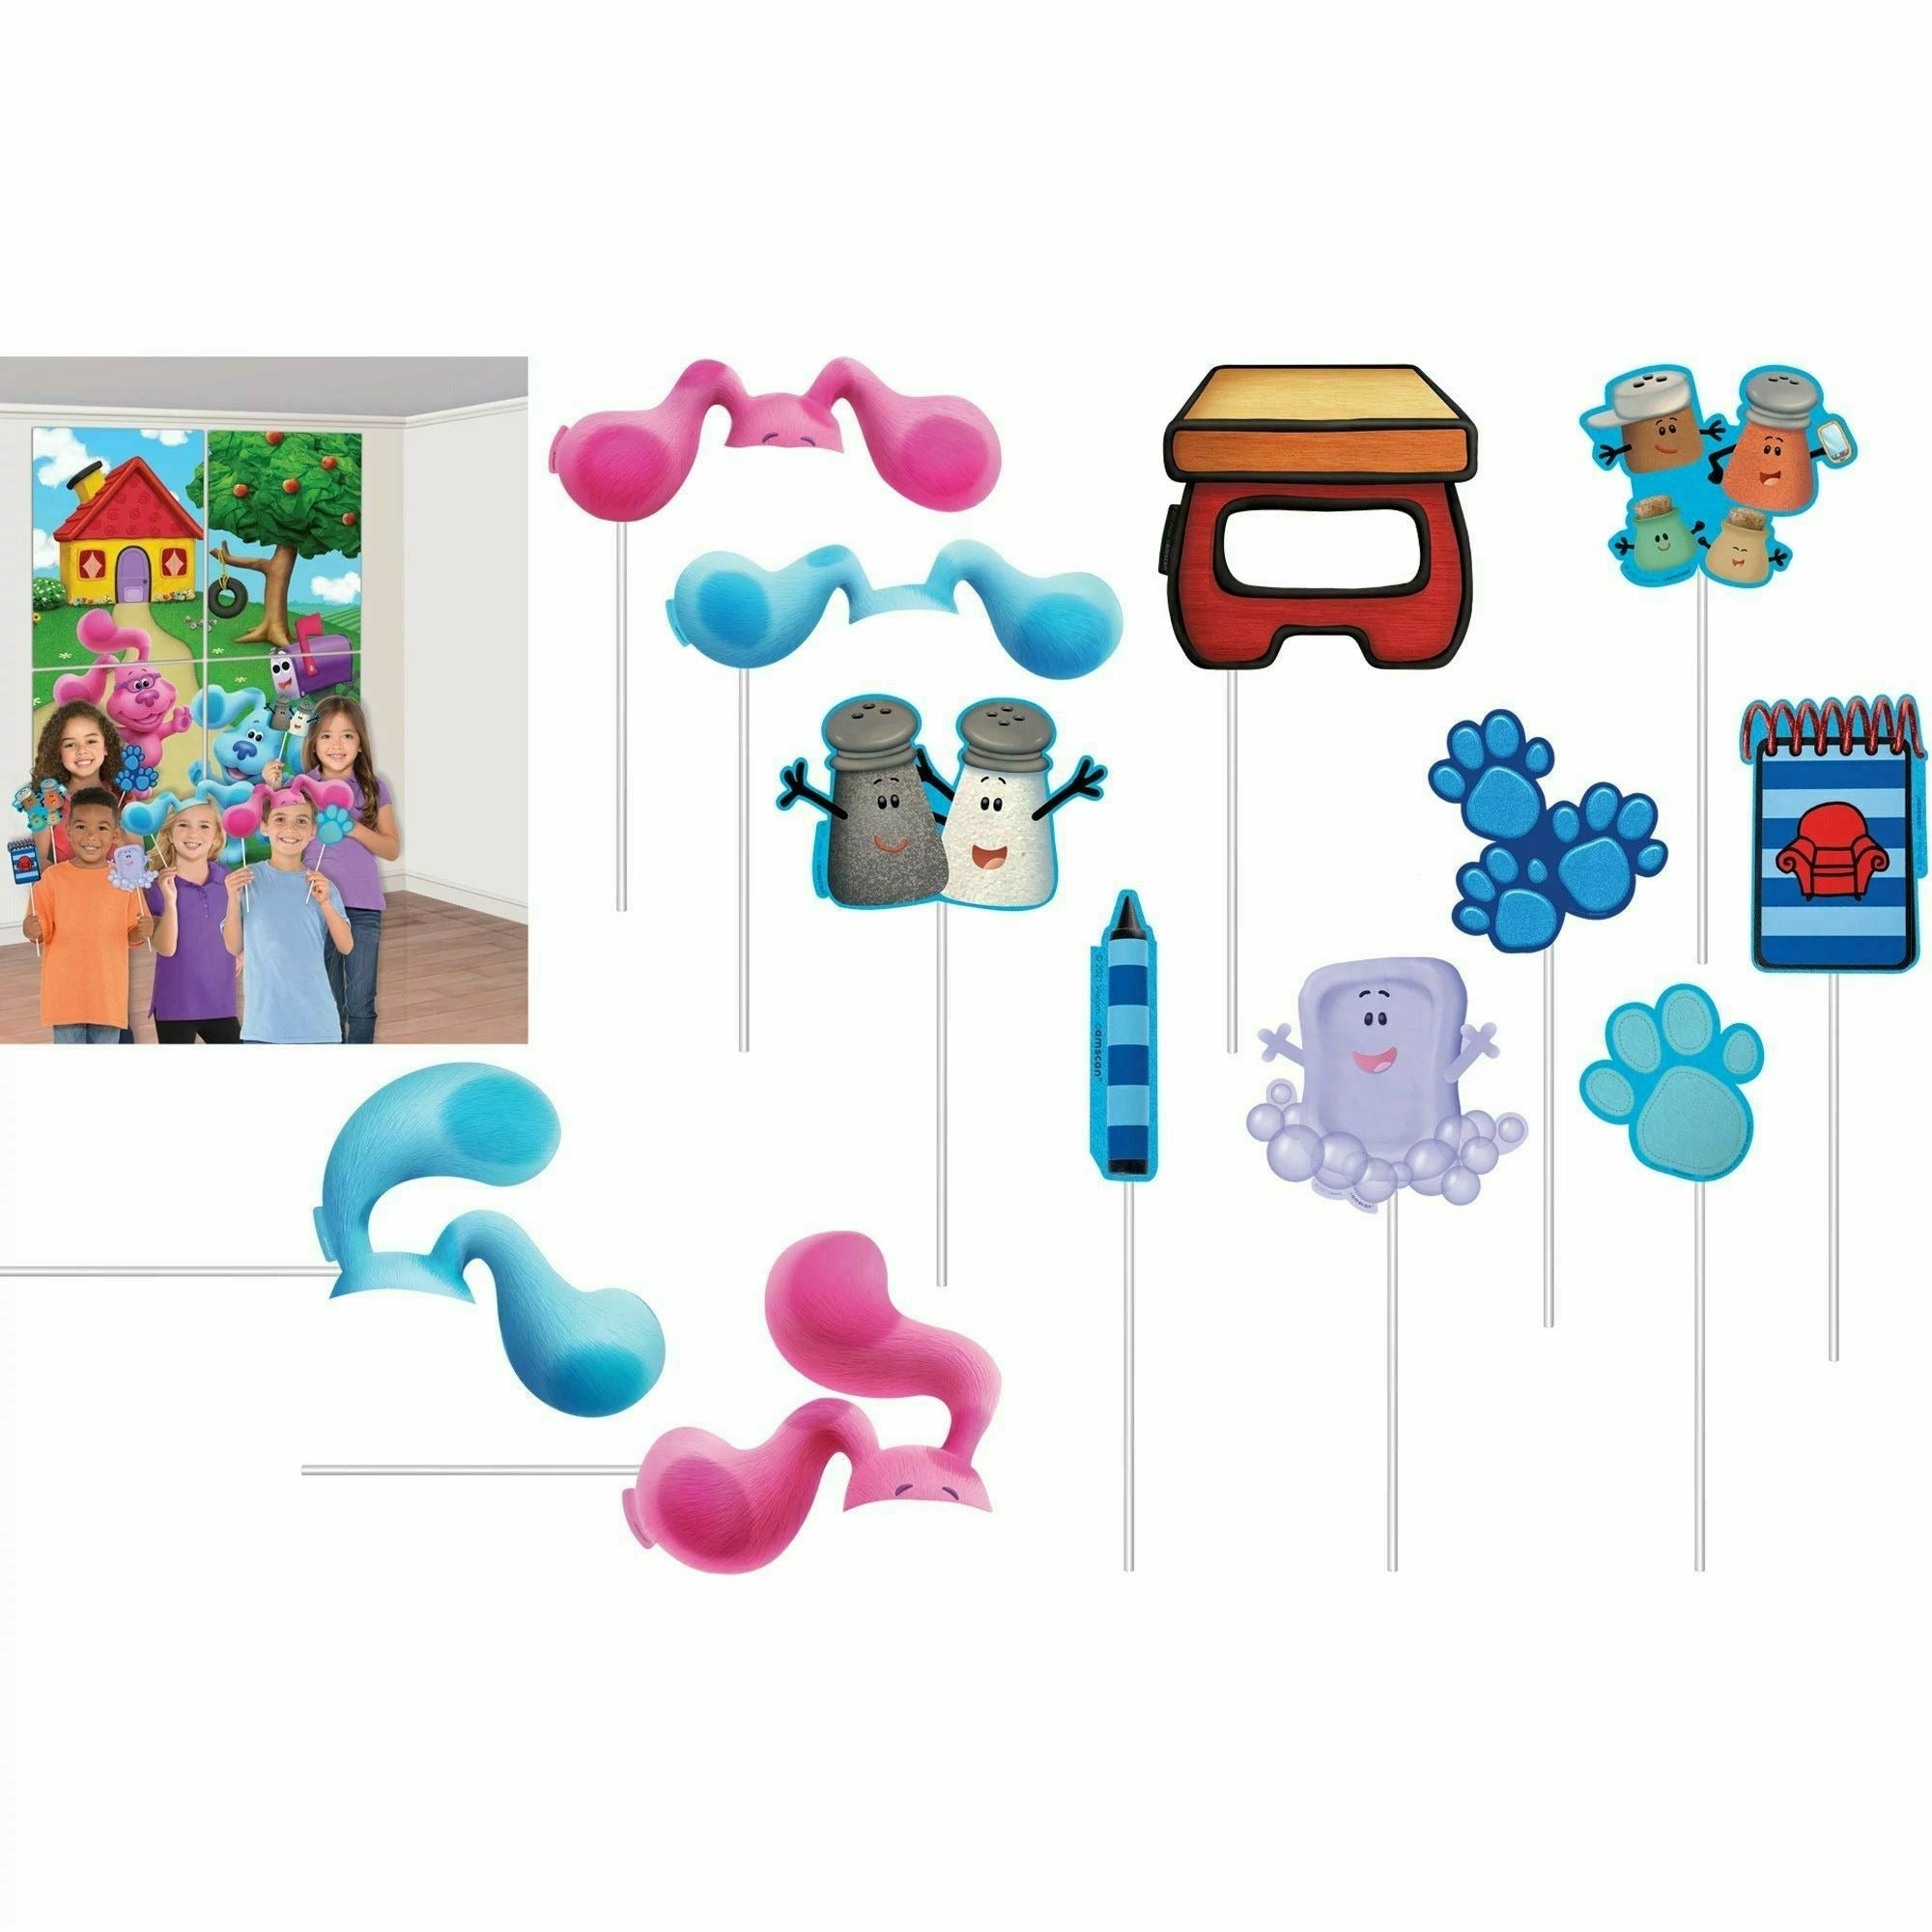 Amscan BIRTHDAY: JUVENILE Blues Clues Scene Setters with Props